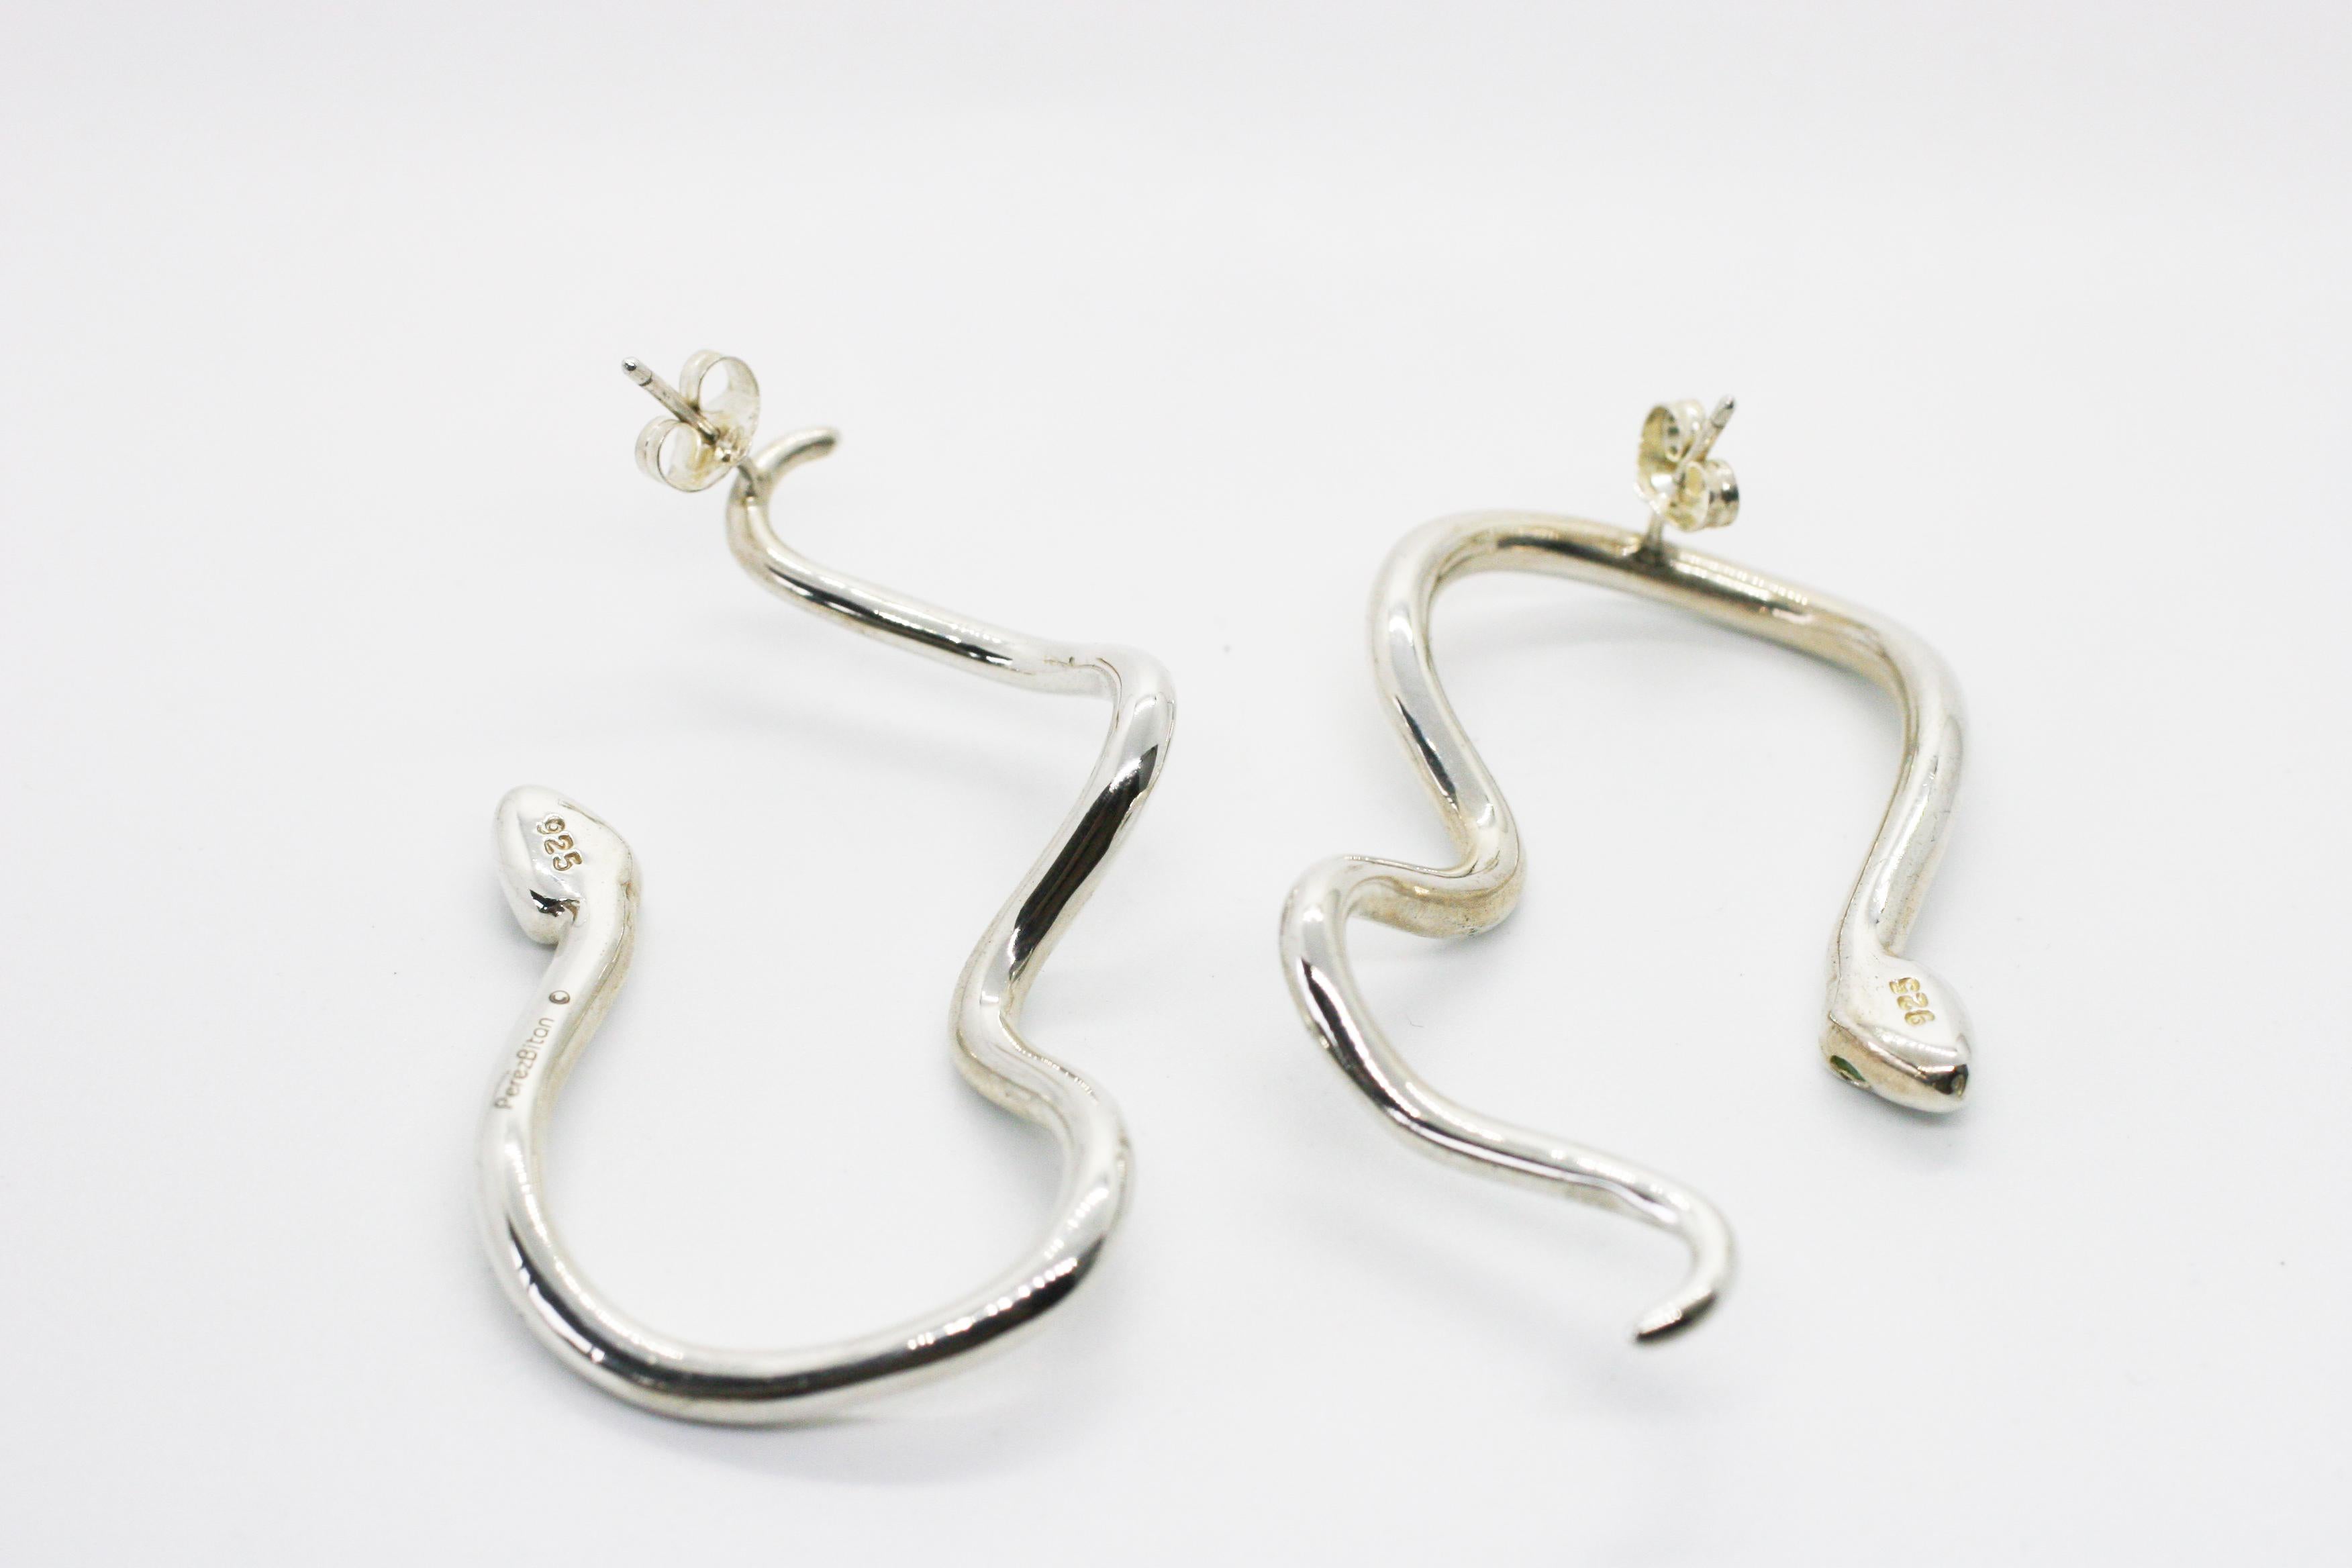 Large Sterling Sliver Signature Snake Hoops feature two oversize curved snakes that frame the face in alternating directions with green tsavorite eyes
Includes Sterling Silver push closure earring backings
Sold as a Pair